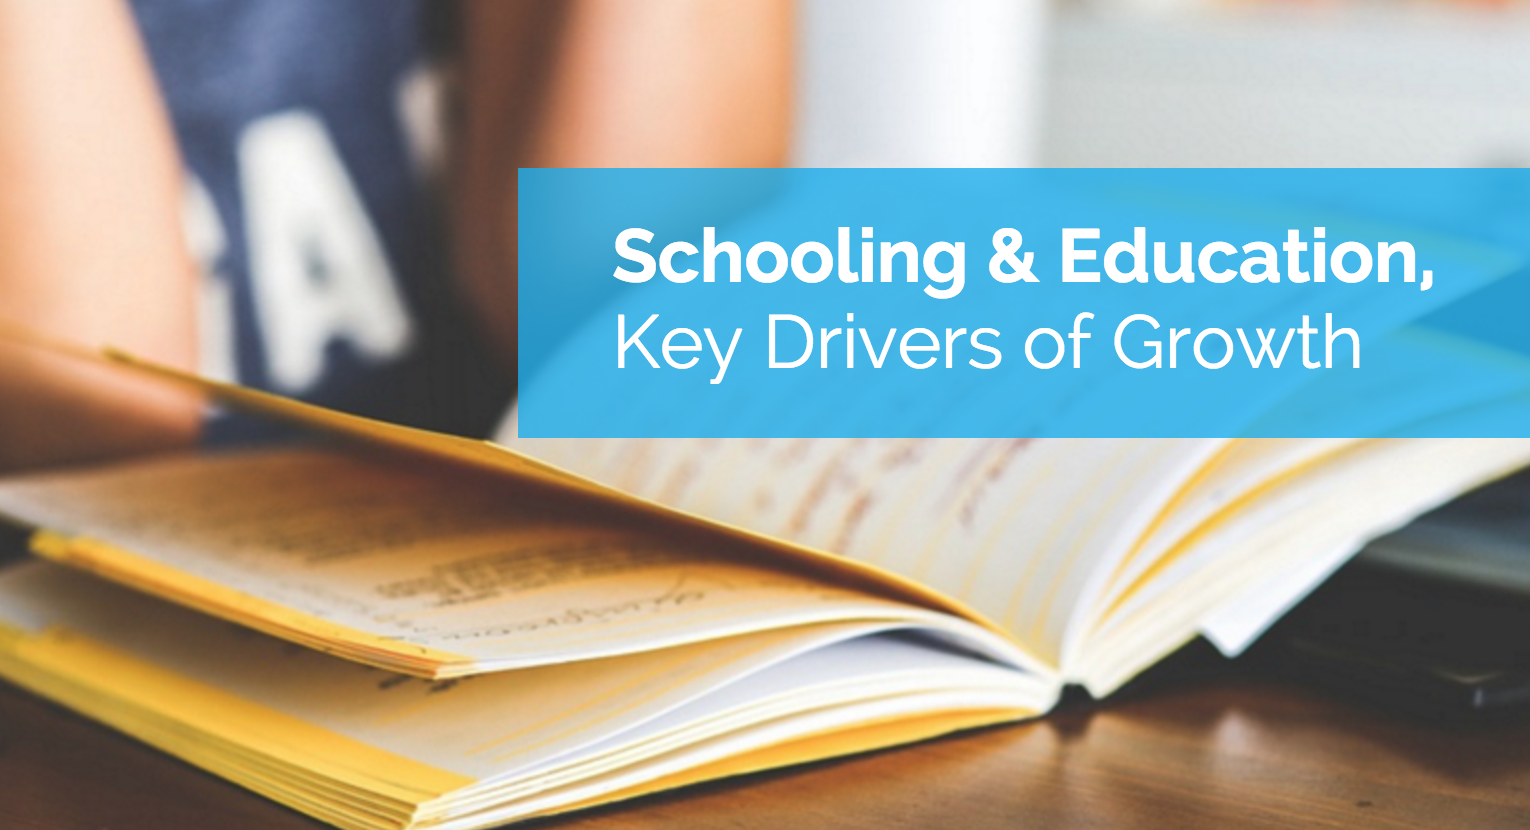 Schooling & Education Are Driving Growth For Investors